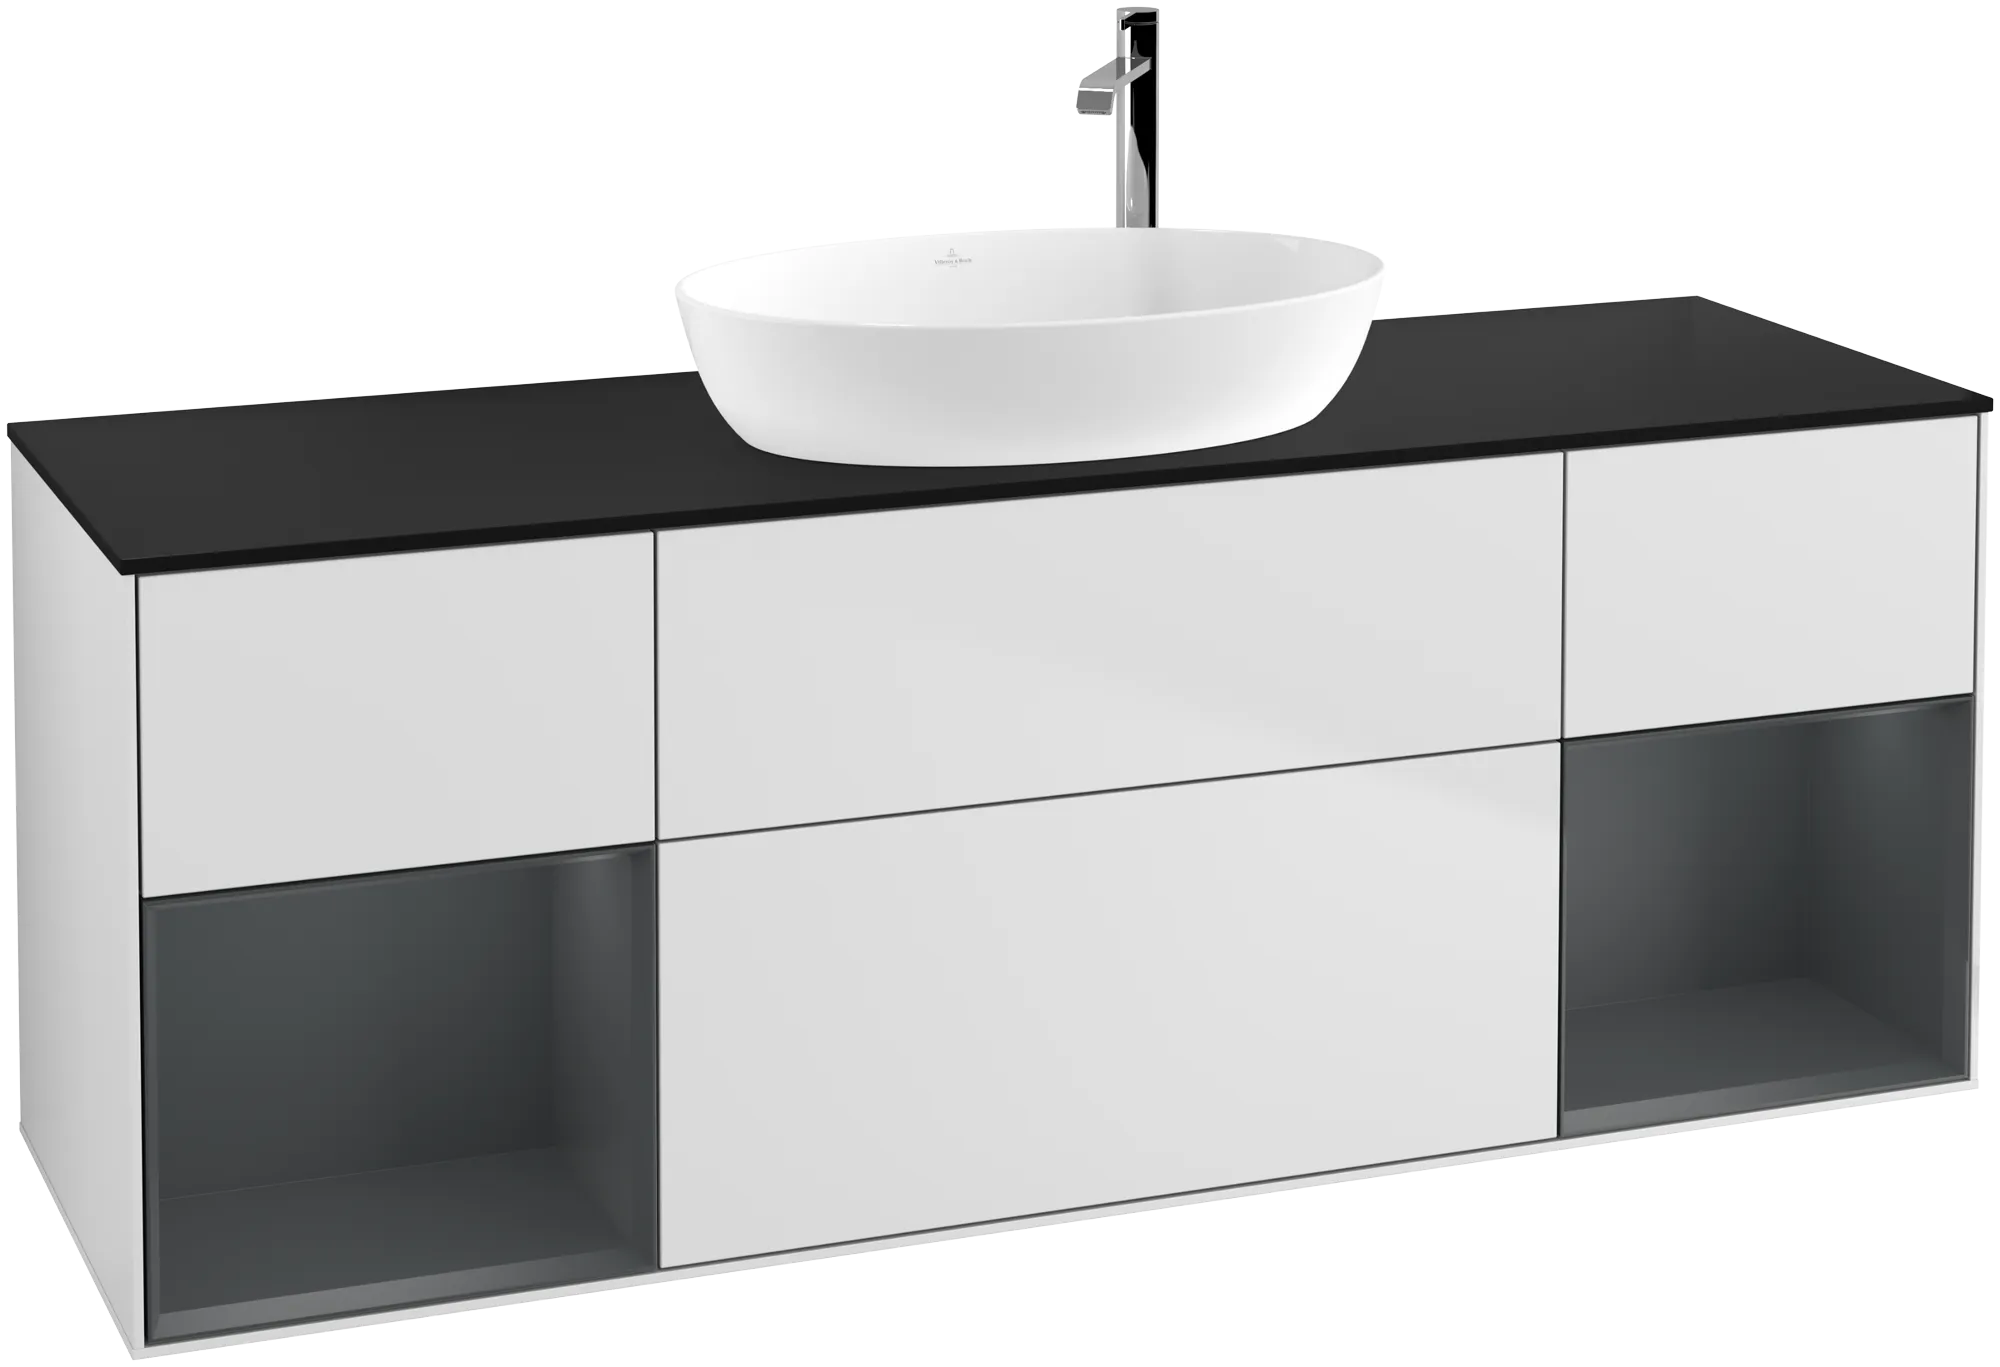 Picture of VILLEROY BOCH Finion Vanity unit, with lighting, 4 pull-out compartments, 1600 x 603 x 501 mm, White Matt Lacquer / Midnight Blue Matt Lacquer / Glass Black Matt #G982HGMT